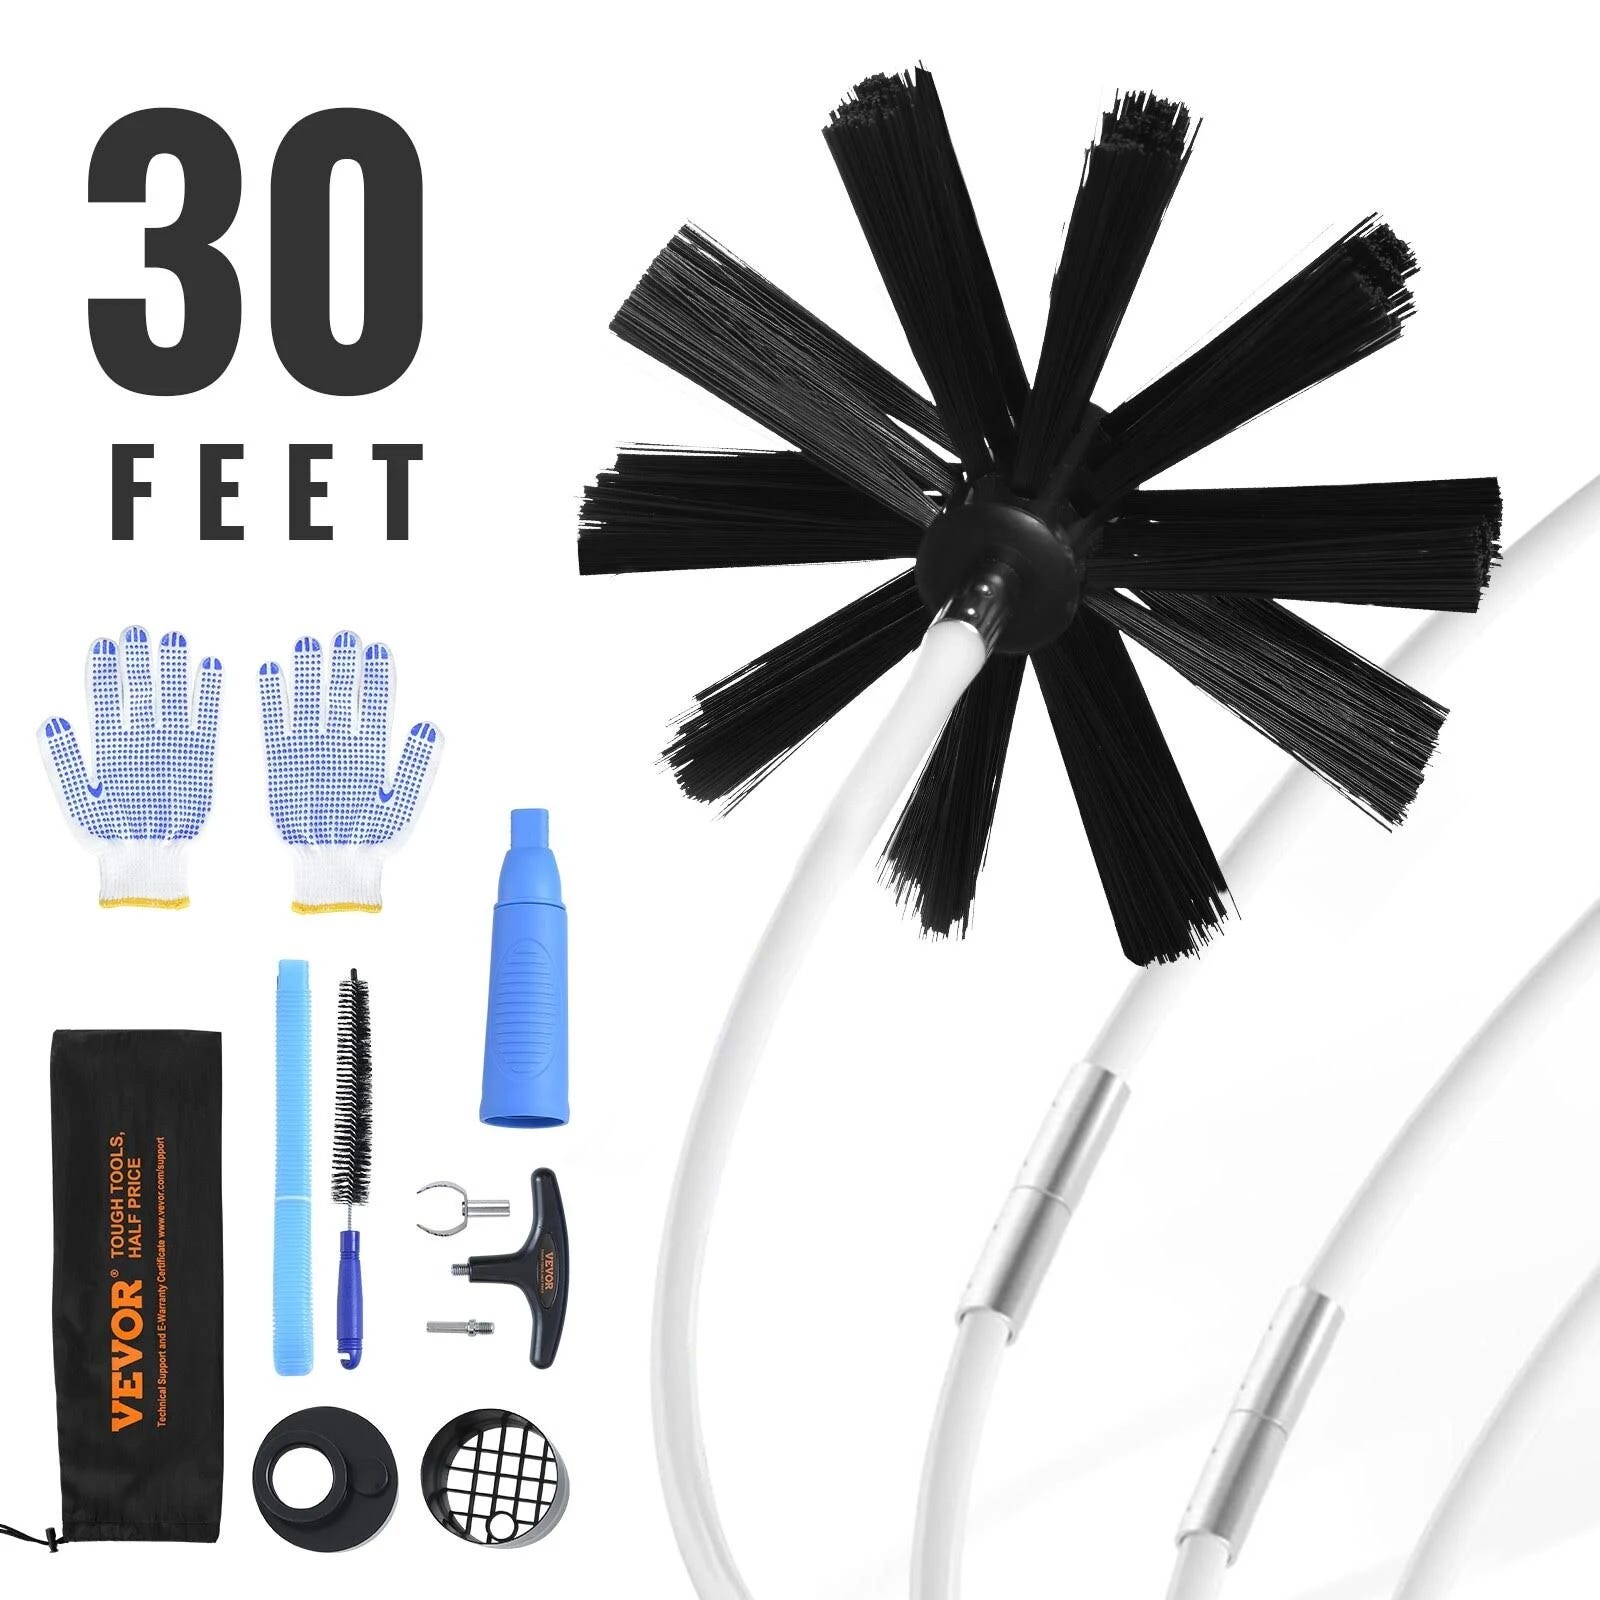 Versatile 30ft Dryer Vent Cleaner Brush Kit with Duct Cleaning Accessories | Image